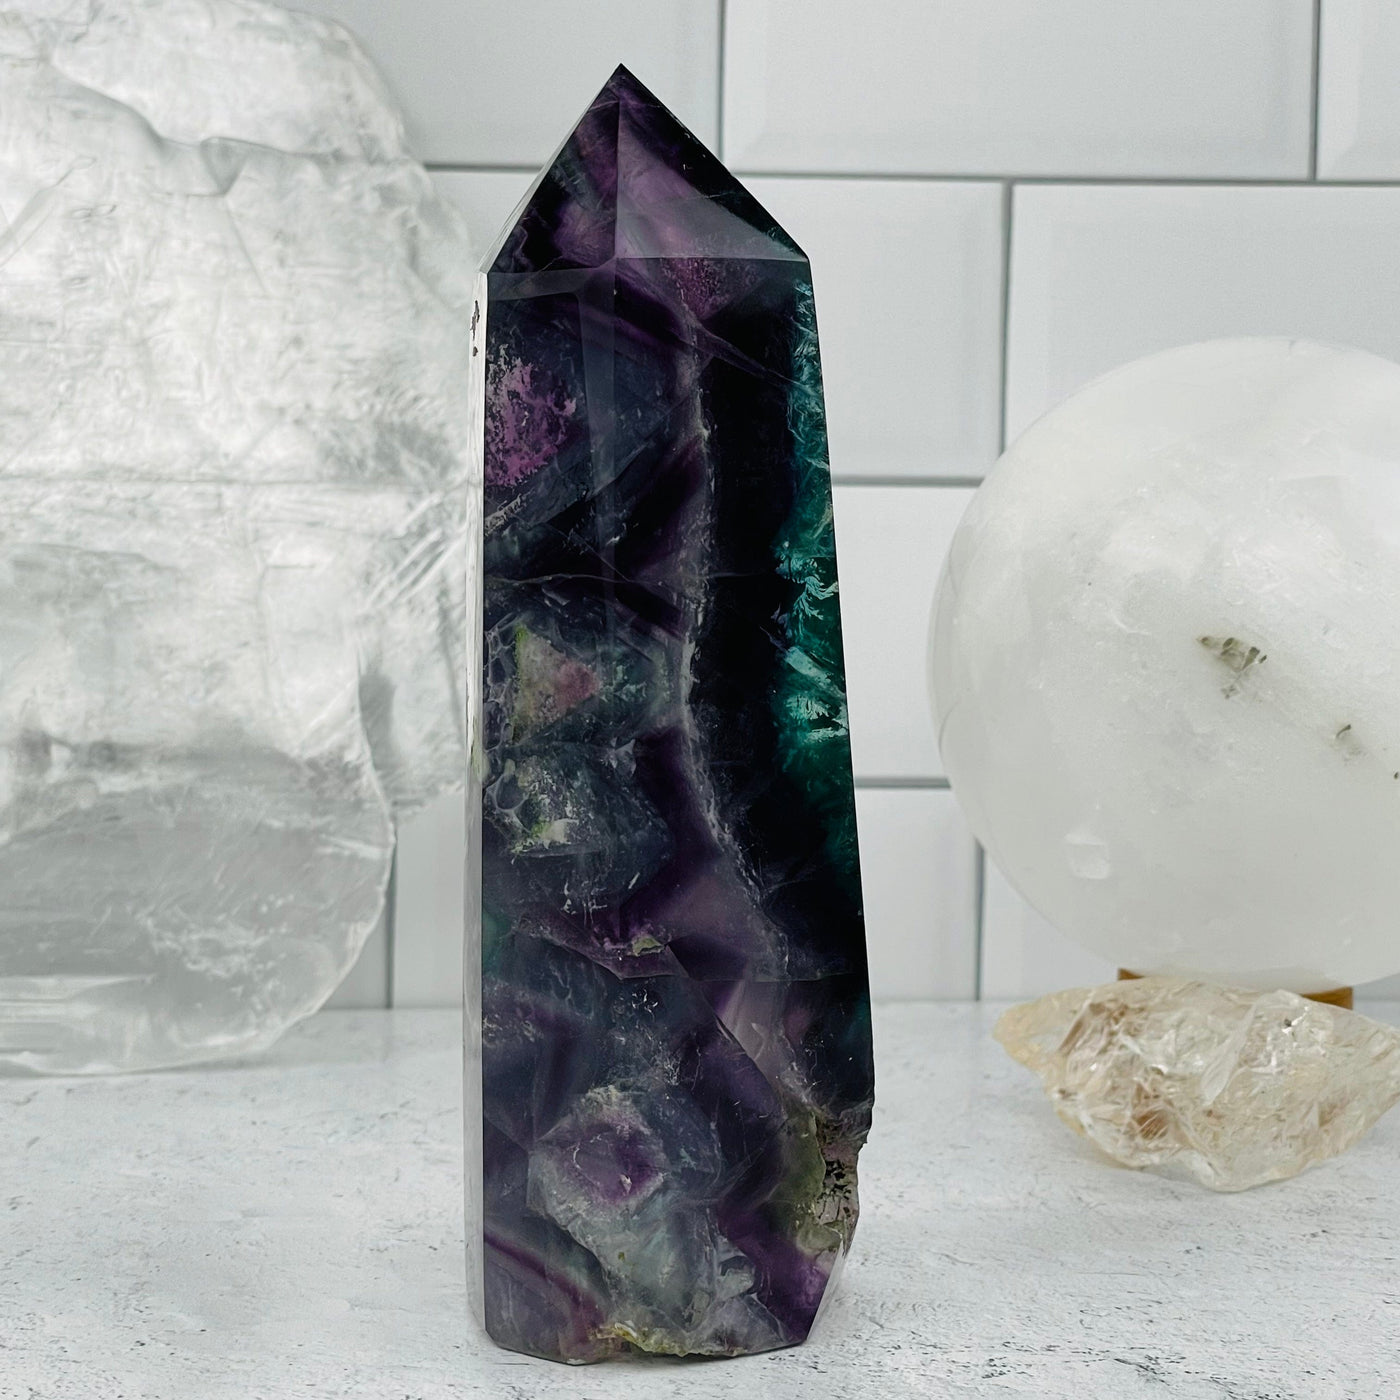 Rainbow Fluorite Polished Point Tower displayed as home decor 